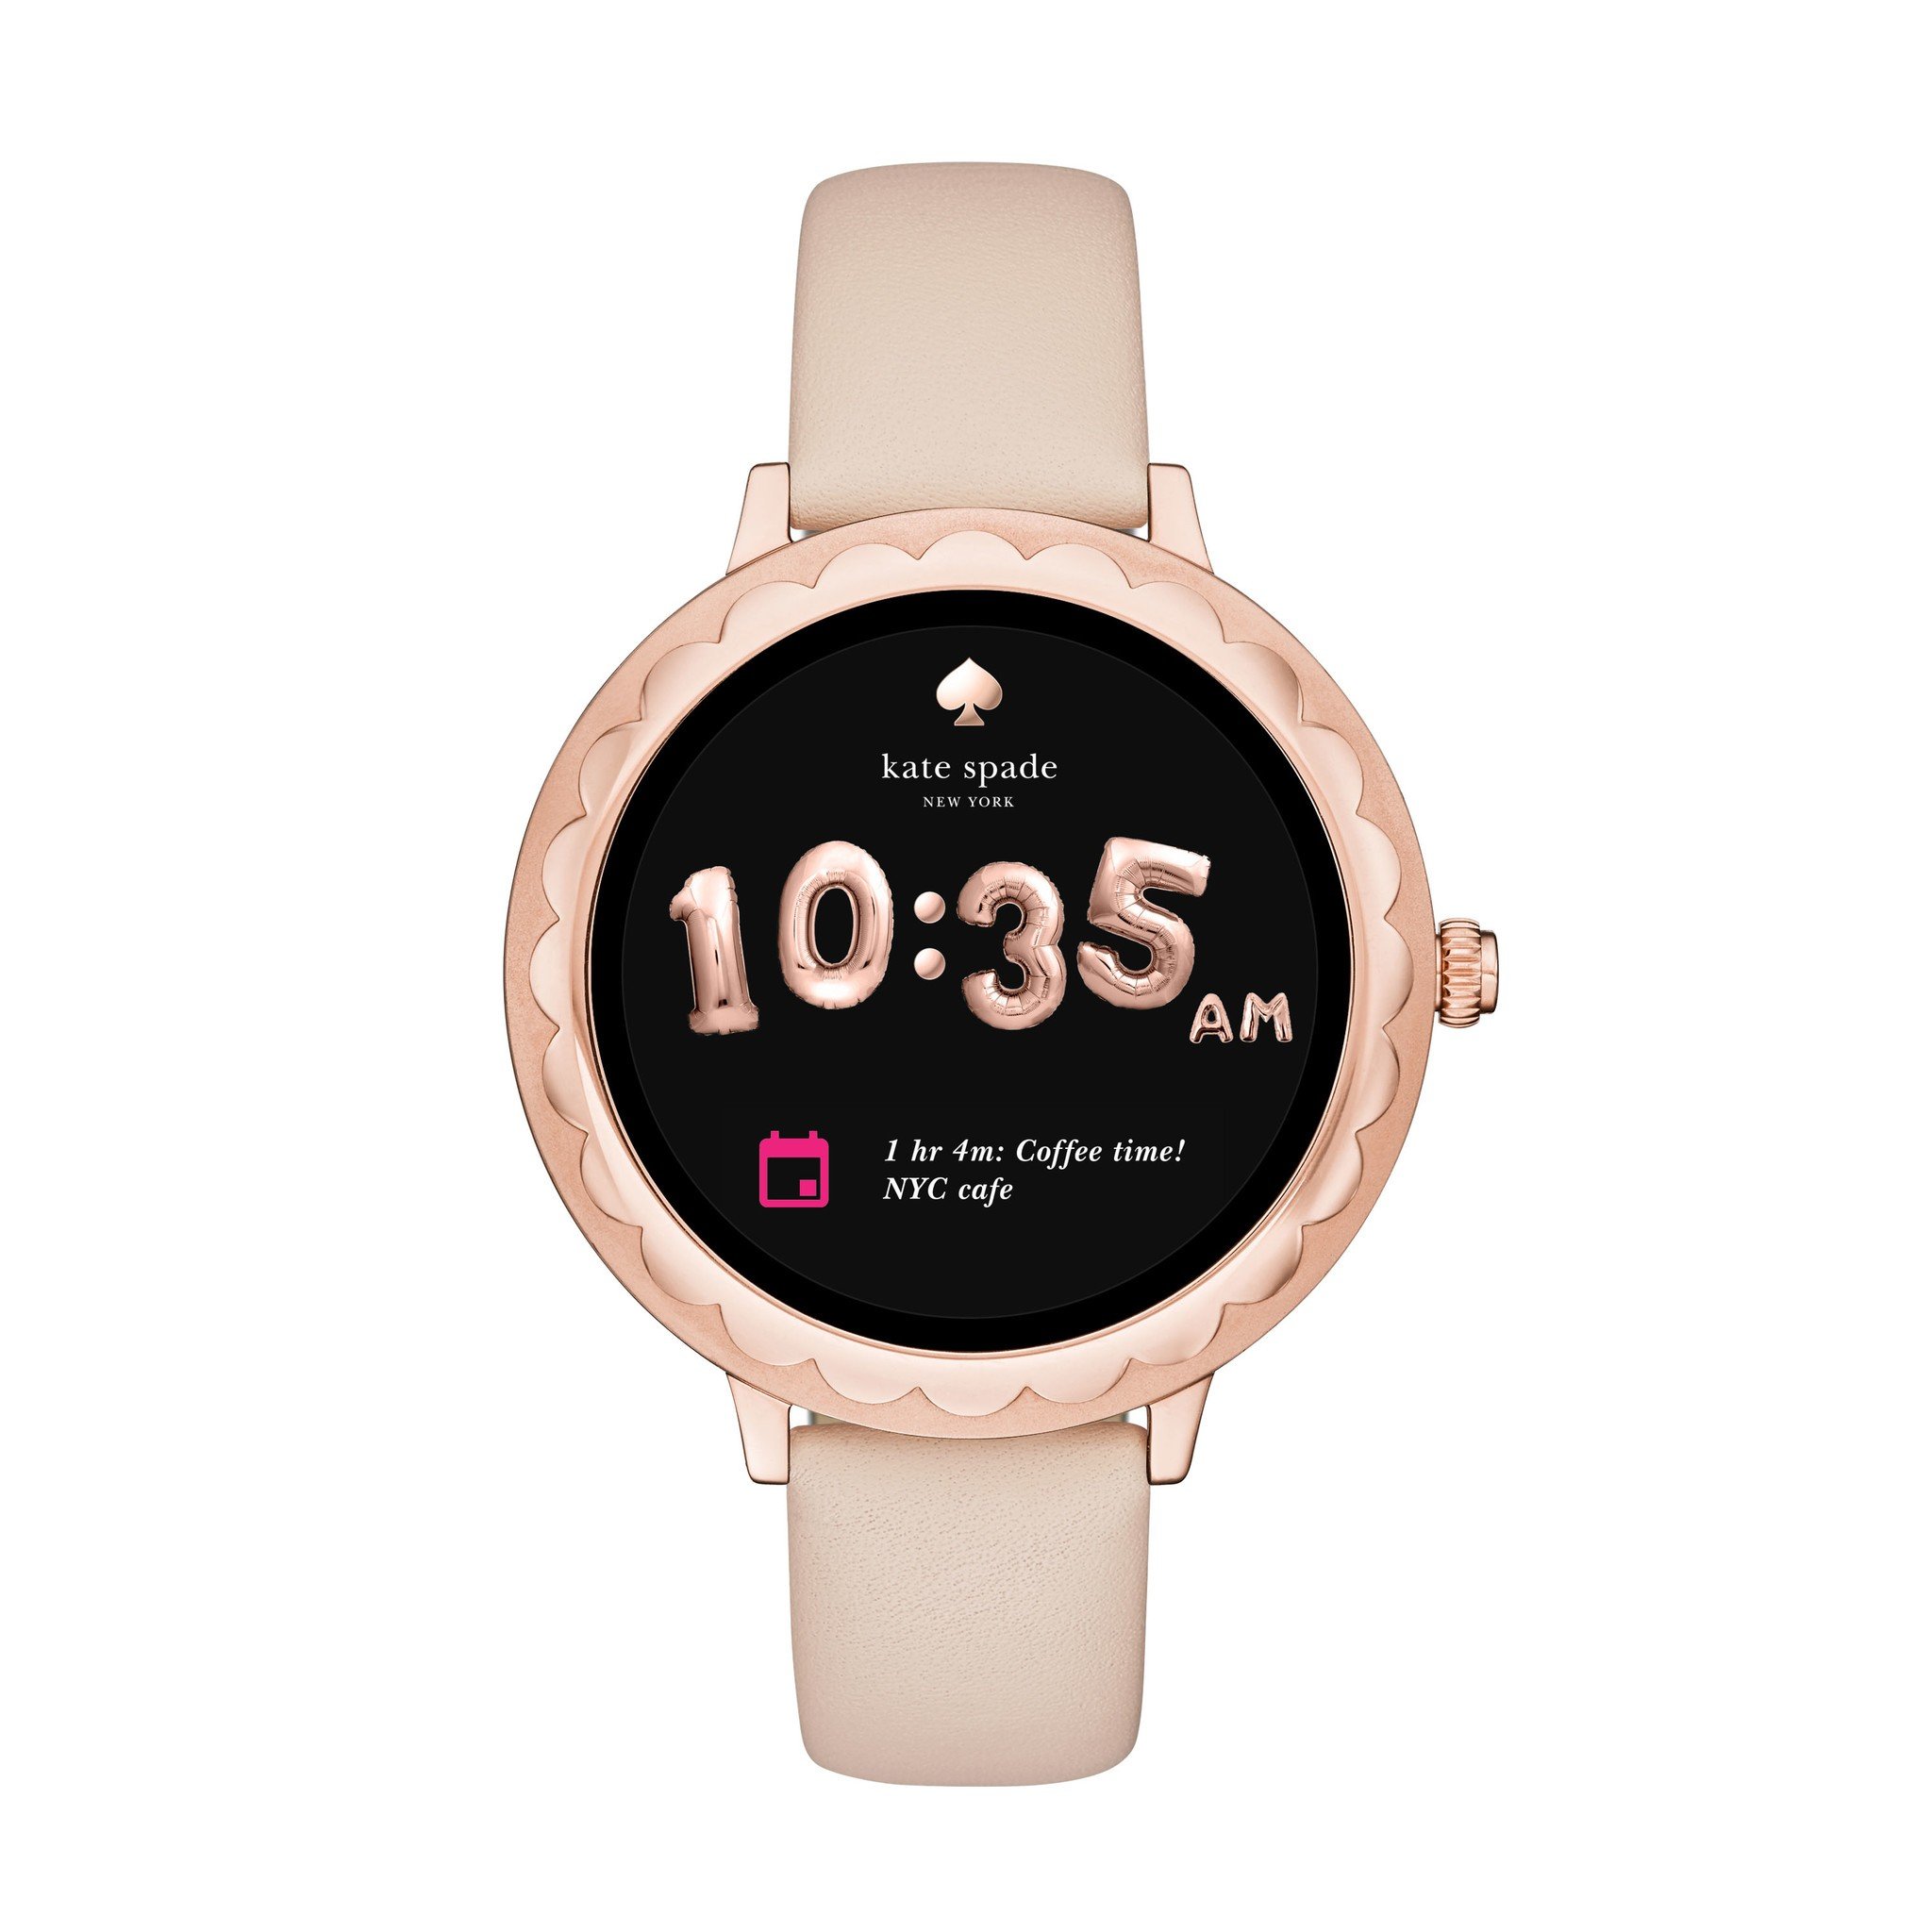 Kate Spade New York Android Wear watch